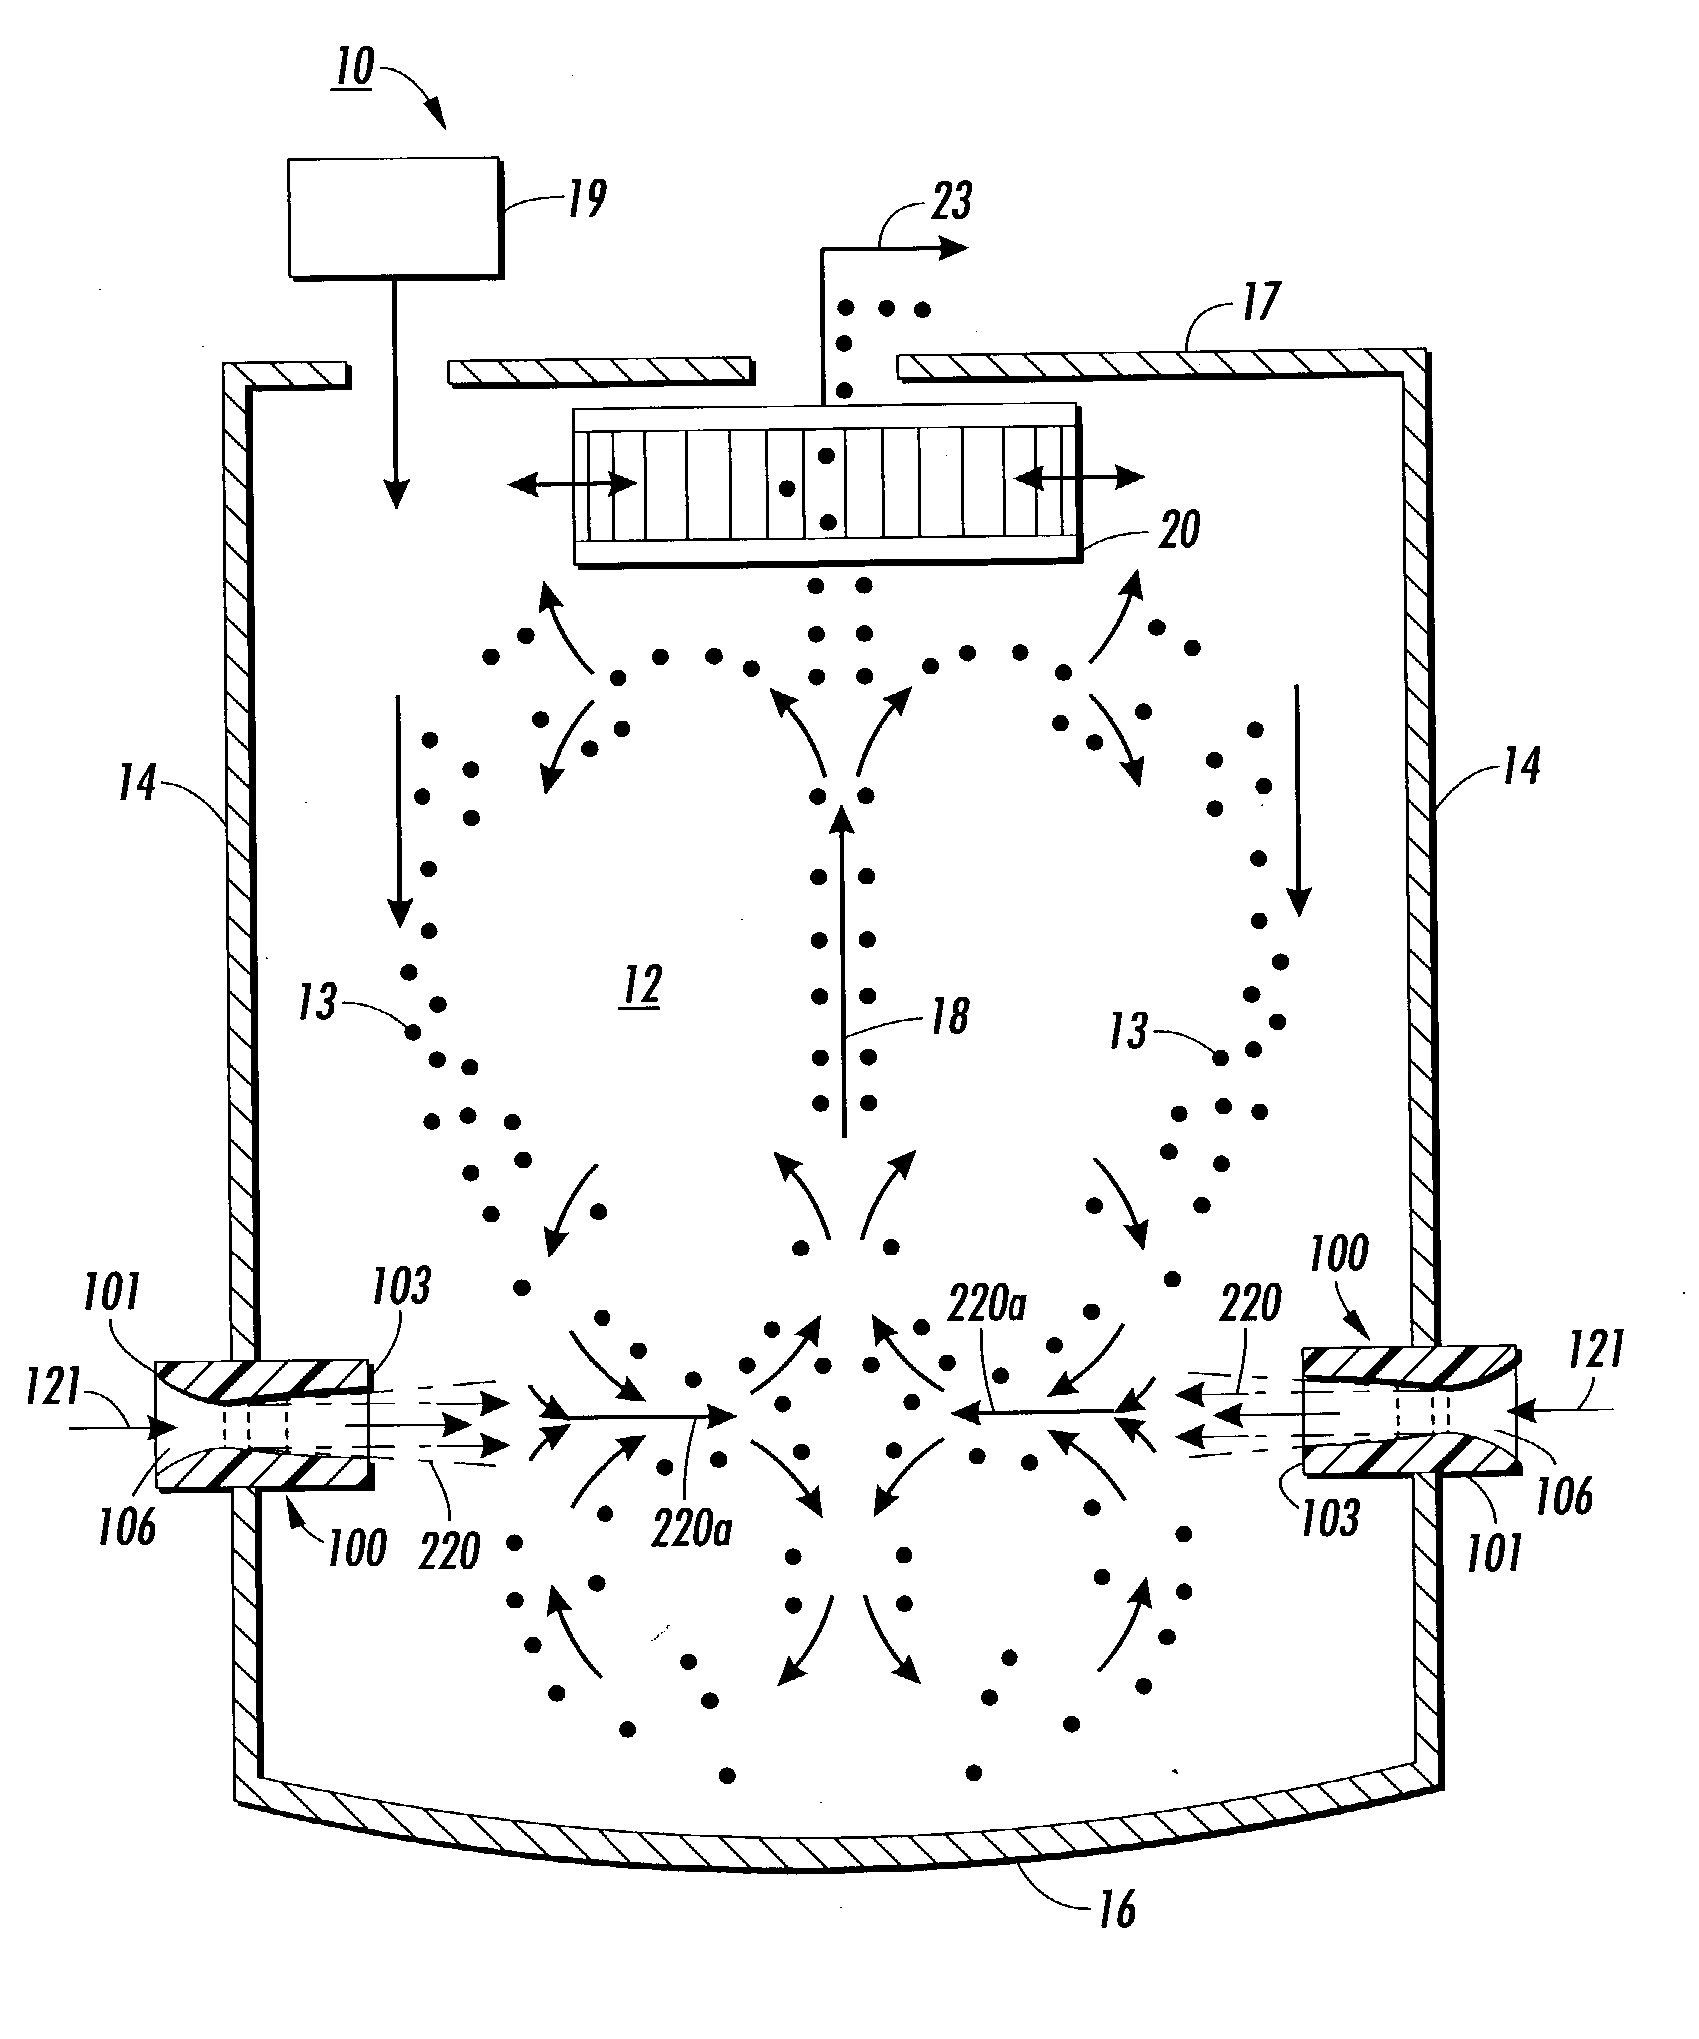 Plural odd number bell-like openings nozzle device for a fluidized bed jet mill